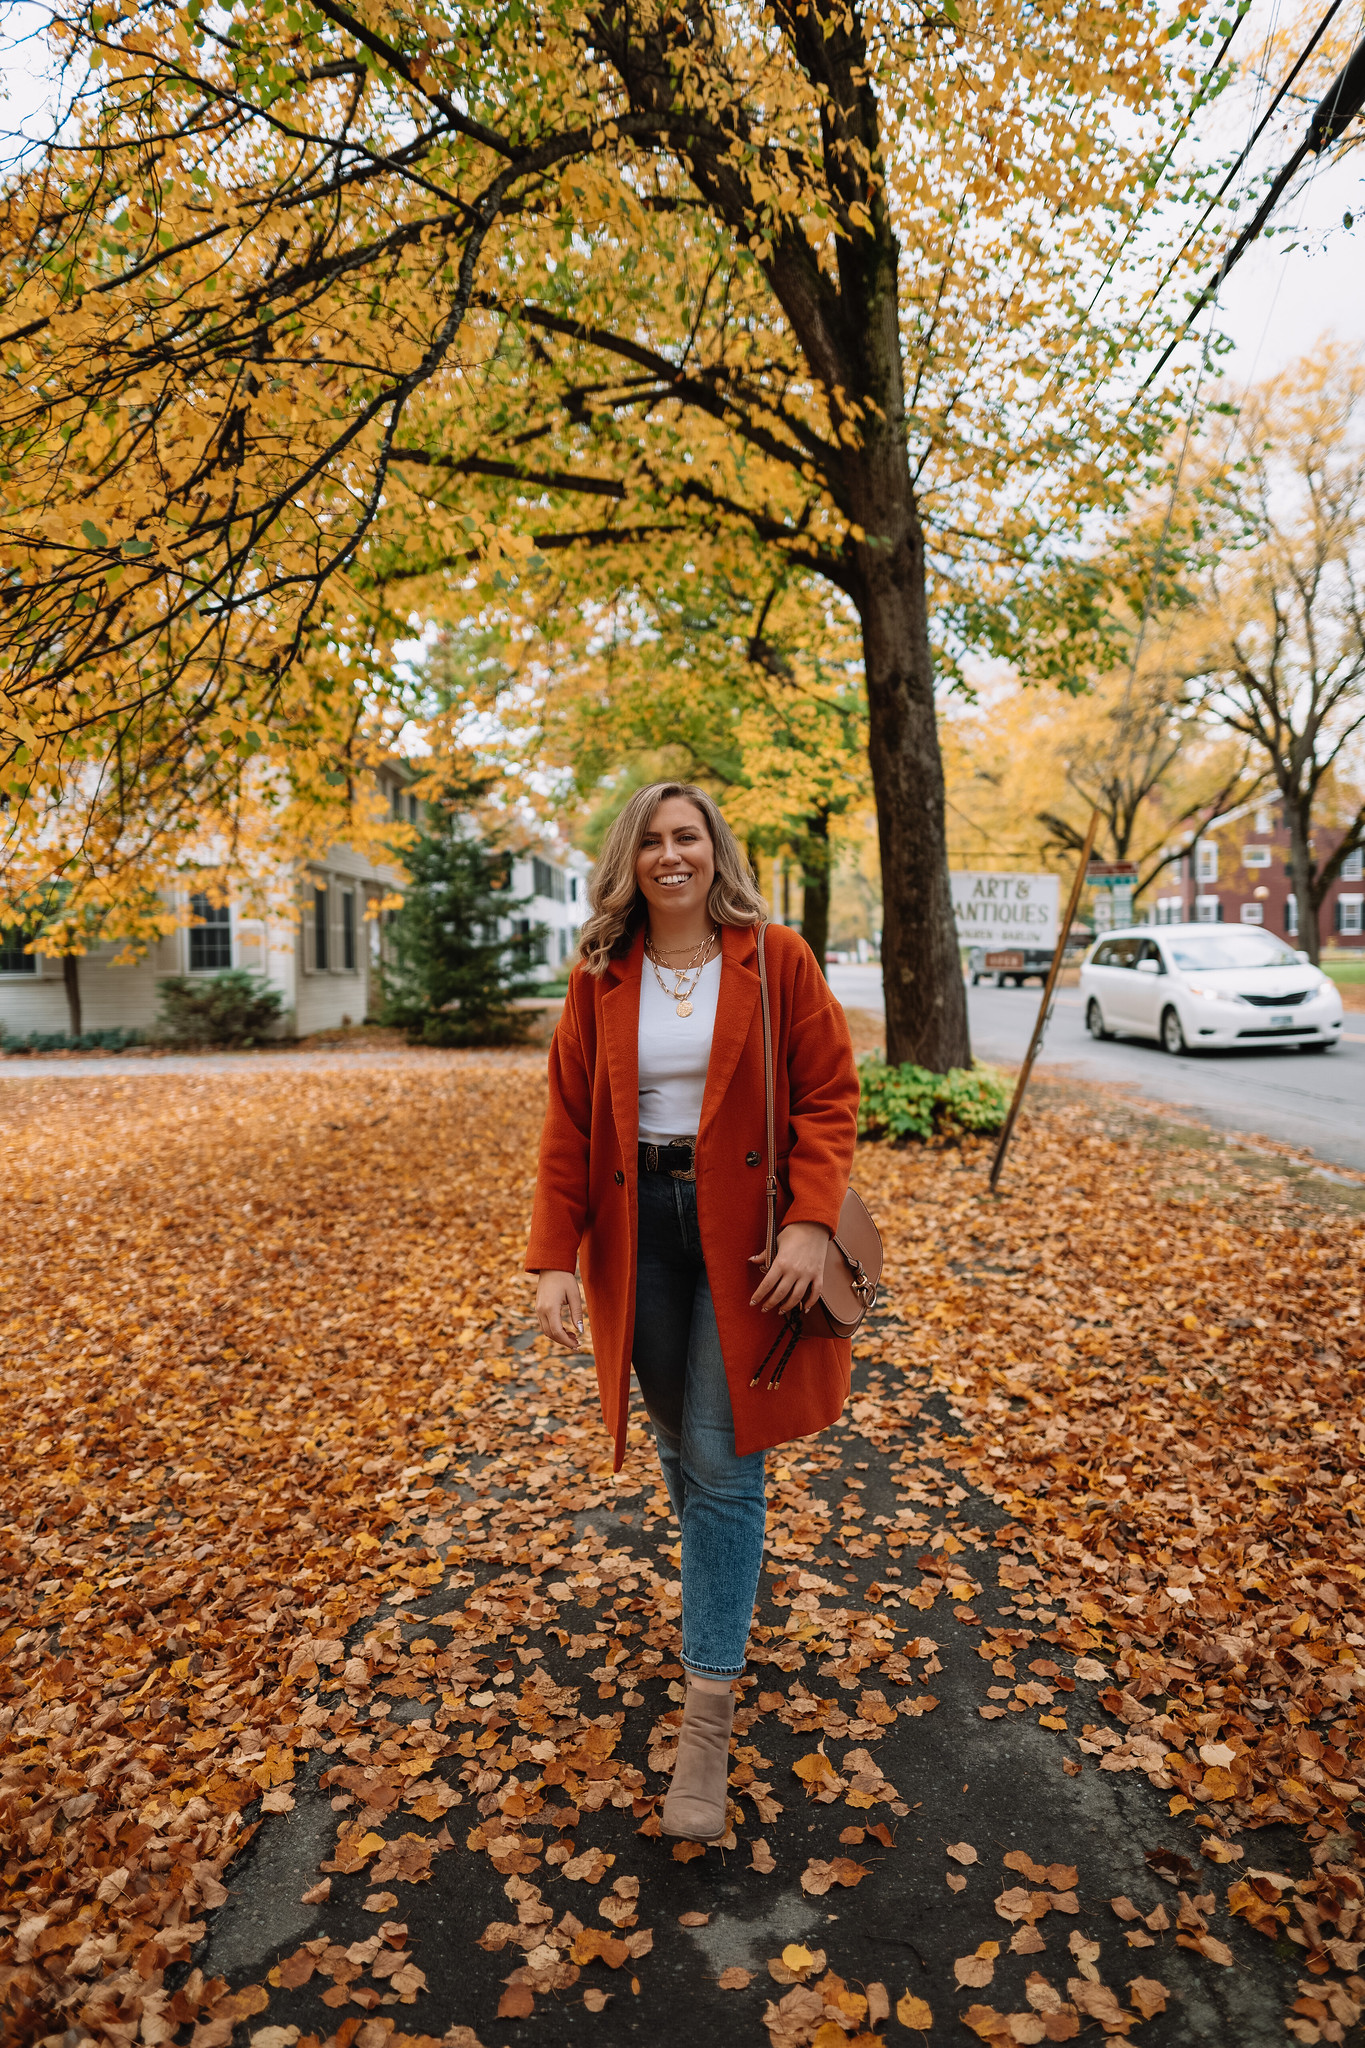 Casual Fall Outfit Inspiration with Orange Coat, Tan Booties and Straight Leg Jeans | Fall Foliage Outfit | What to Wear in Vermont in the Fall | Vermont Packing List for Fall | What to Wear in Vermont in October | What to Wear on a Fall Vacation | Fall Outfits